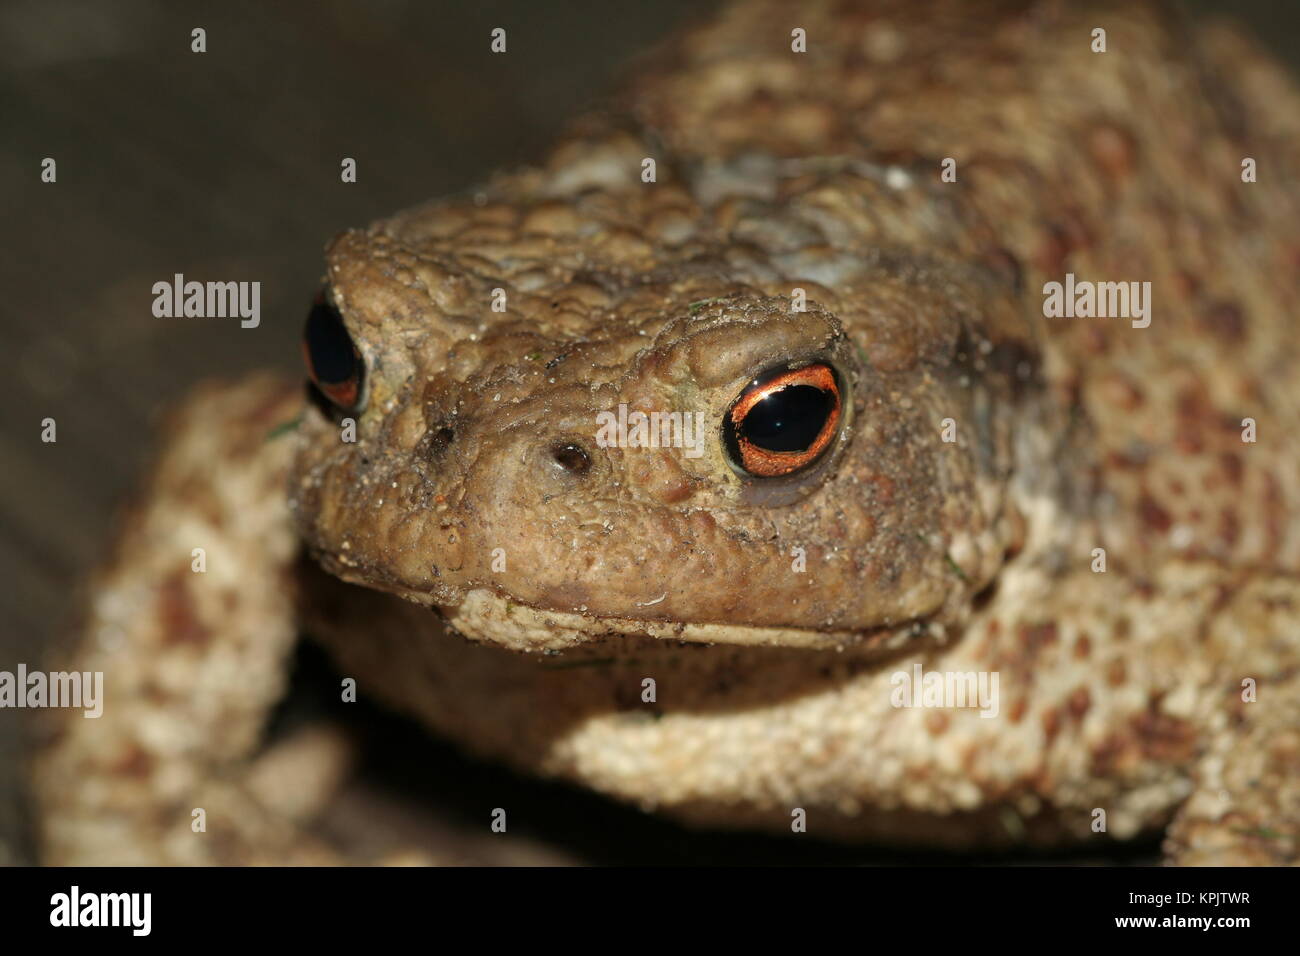 ugly common toad portrait looking at the camera, macro image Stock Photo